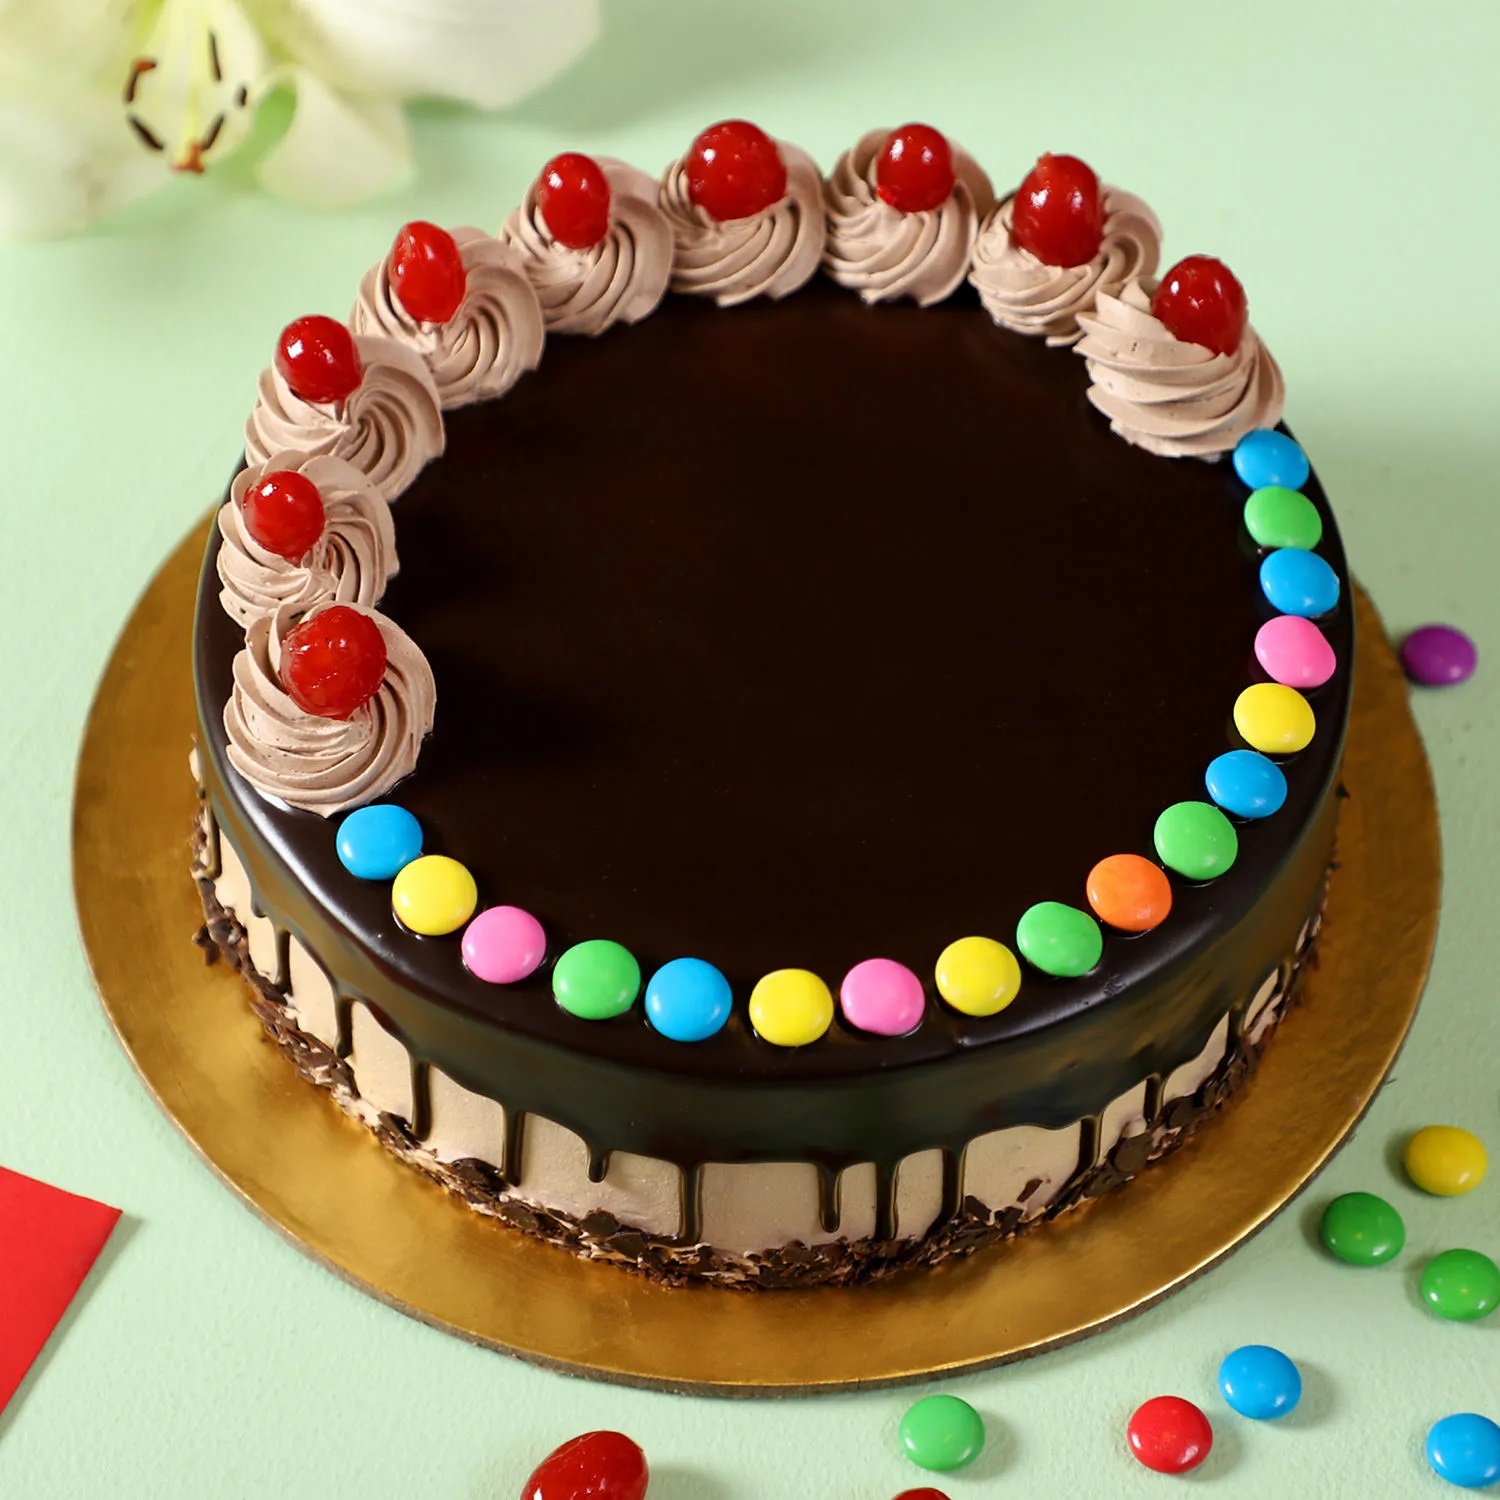 Spice up taste buds of your kids with the delicious cake - Winni